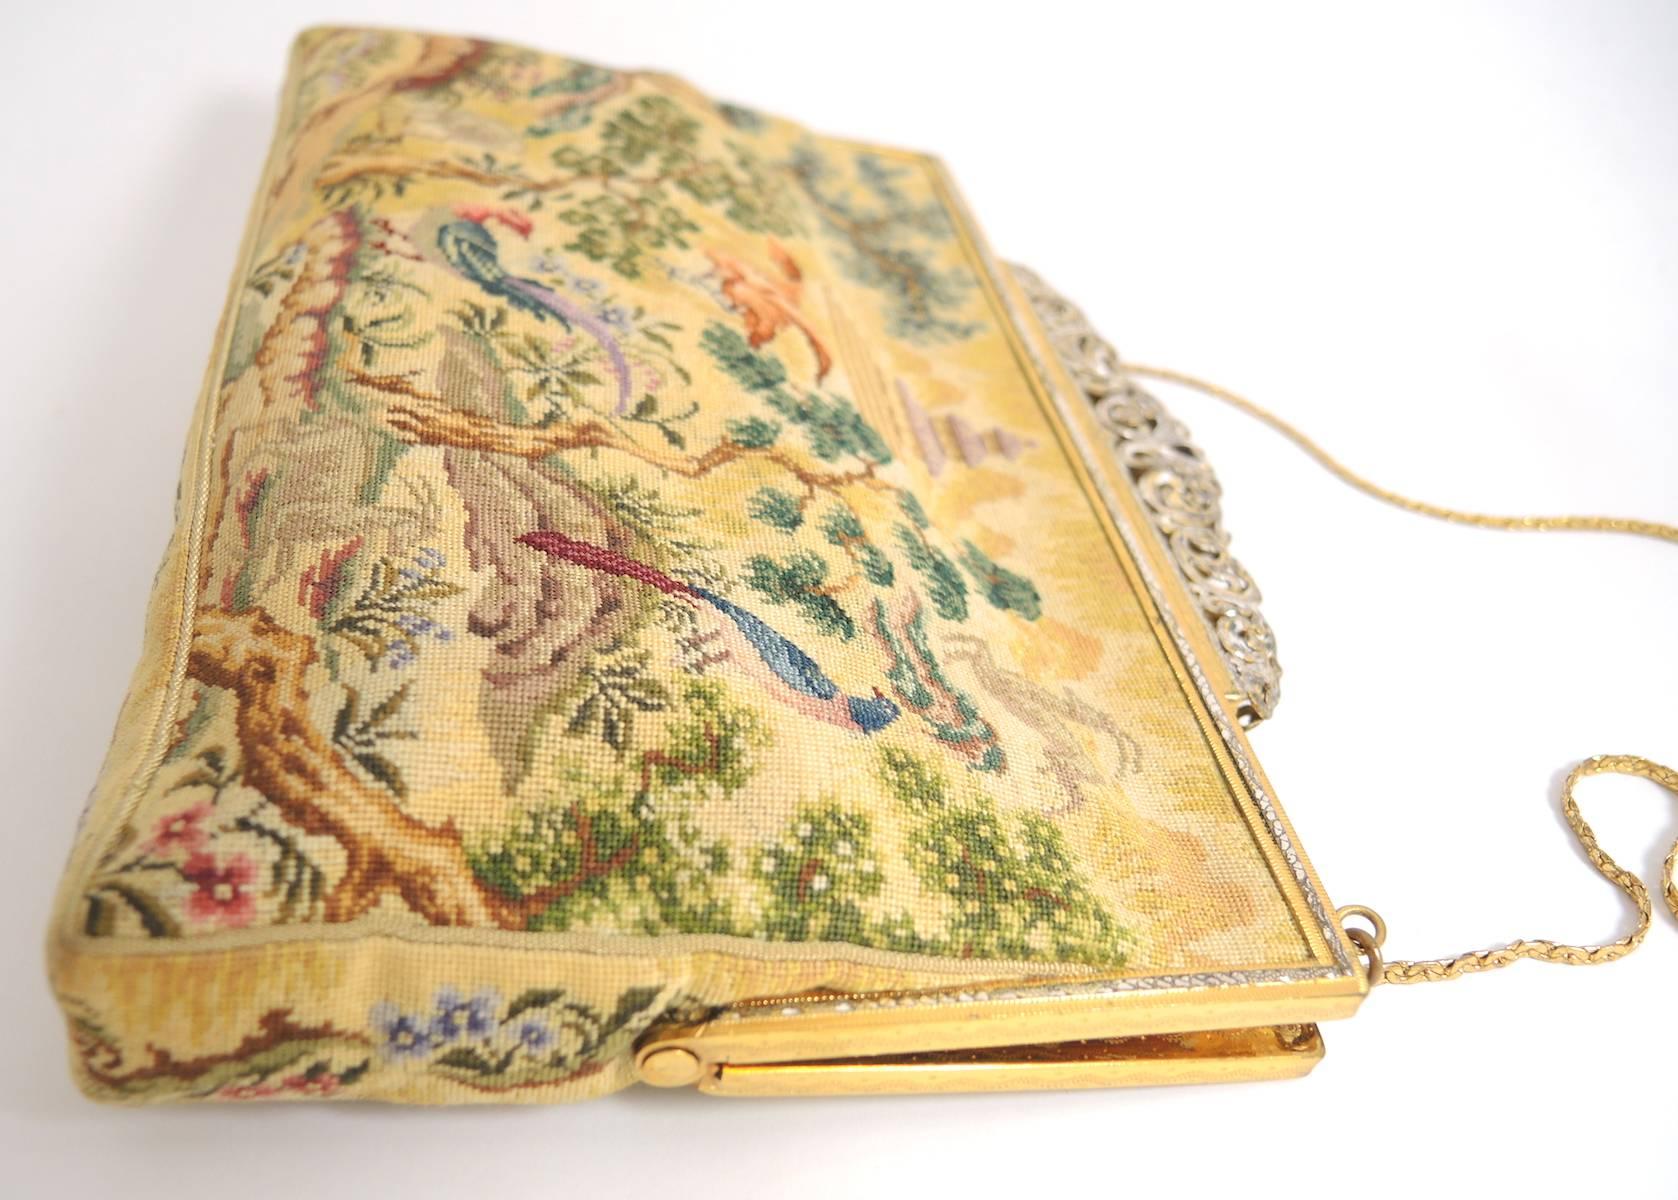 This is a beautiful tapestry handbag with a tiara-style top closure. The tapestry features a garden with trees, birds and an Asian temple on top. The inside has a gold satin lining. It has a gold-tone handle and measures 5-1/2” x 7-3/4”. The handle